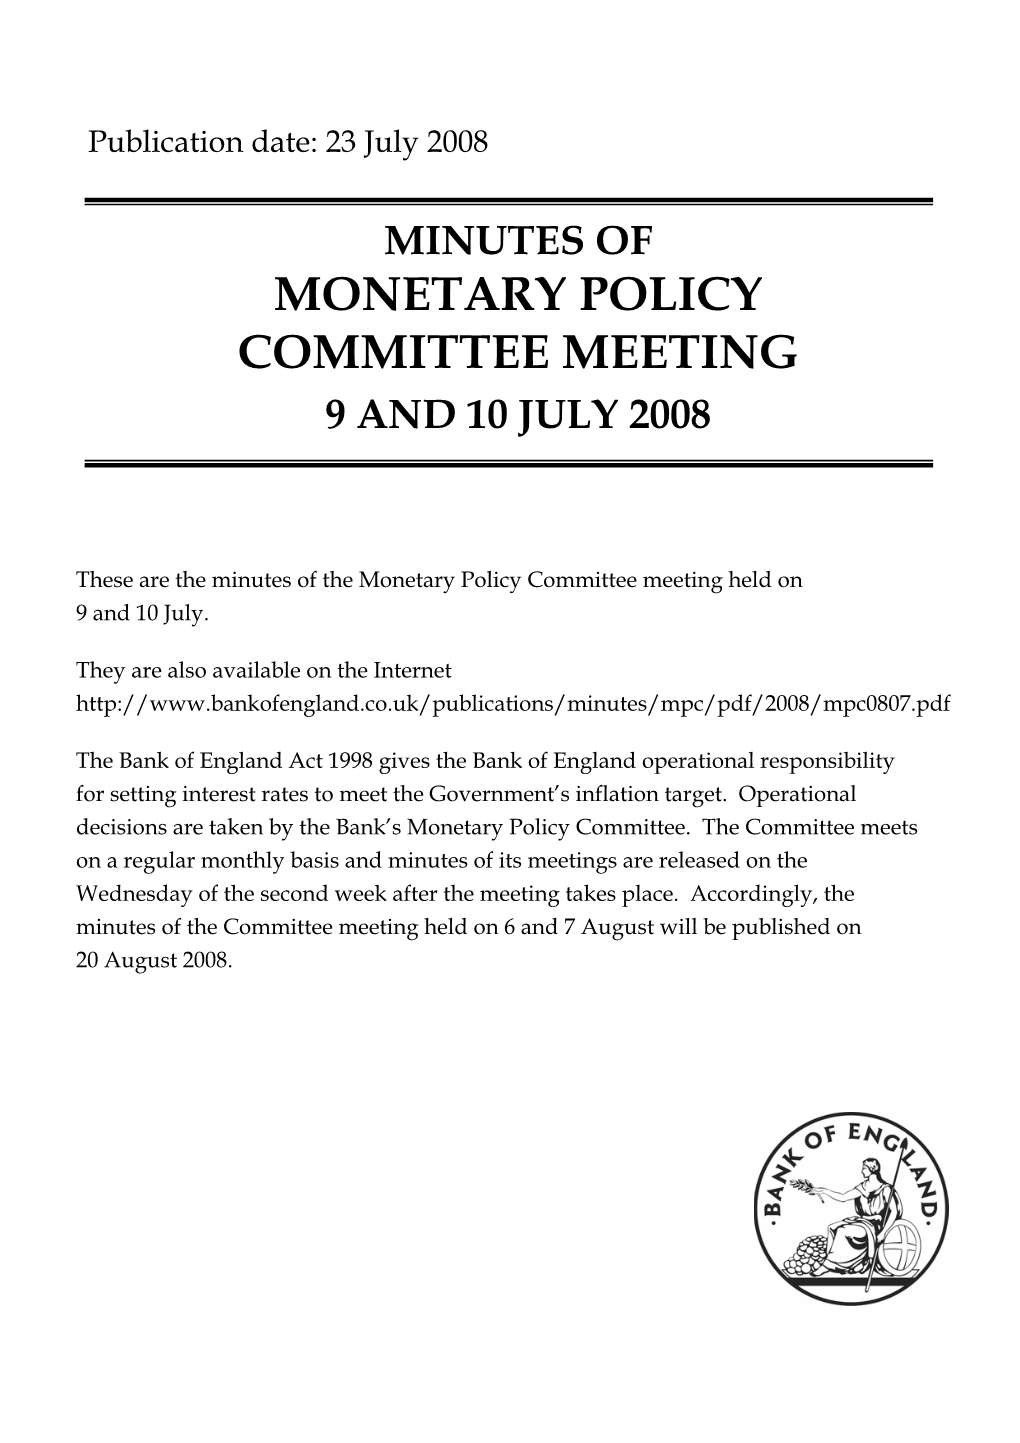 Monetary Policy Committee Meeting 9 and 10 July 2008